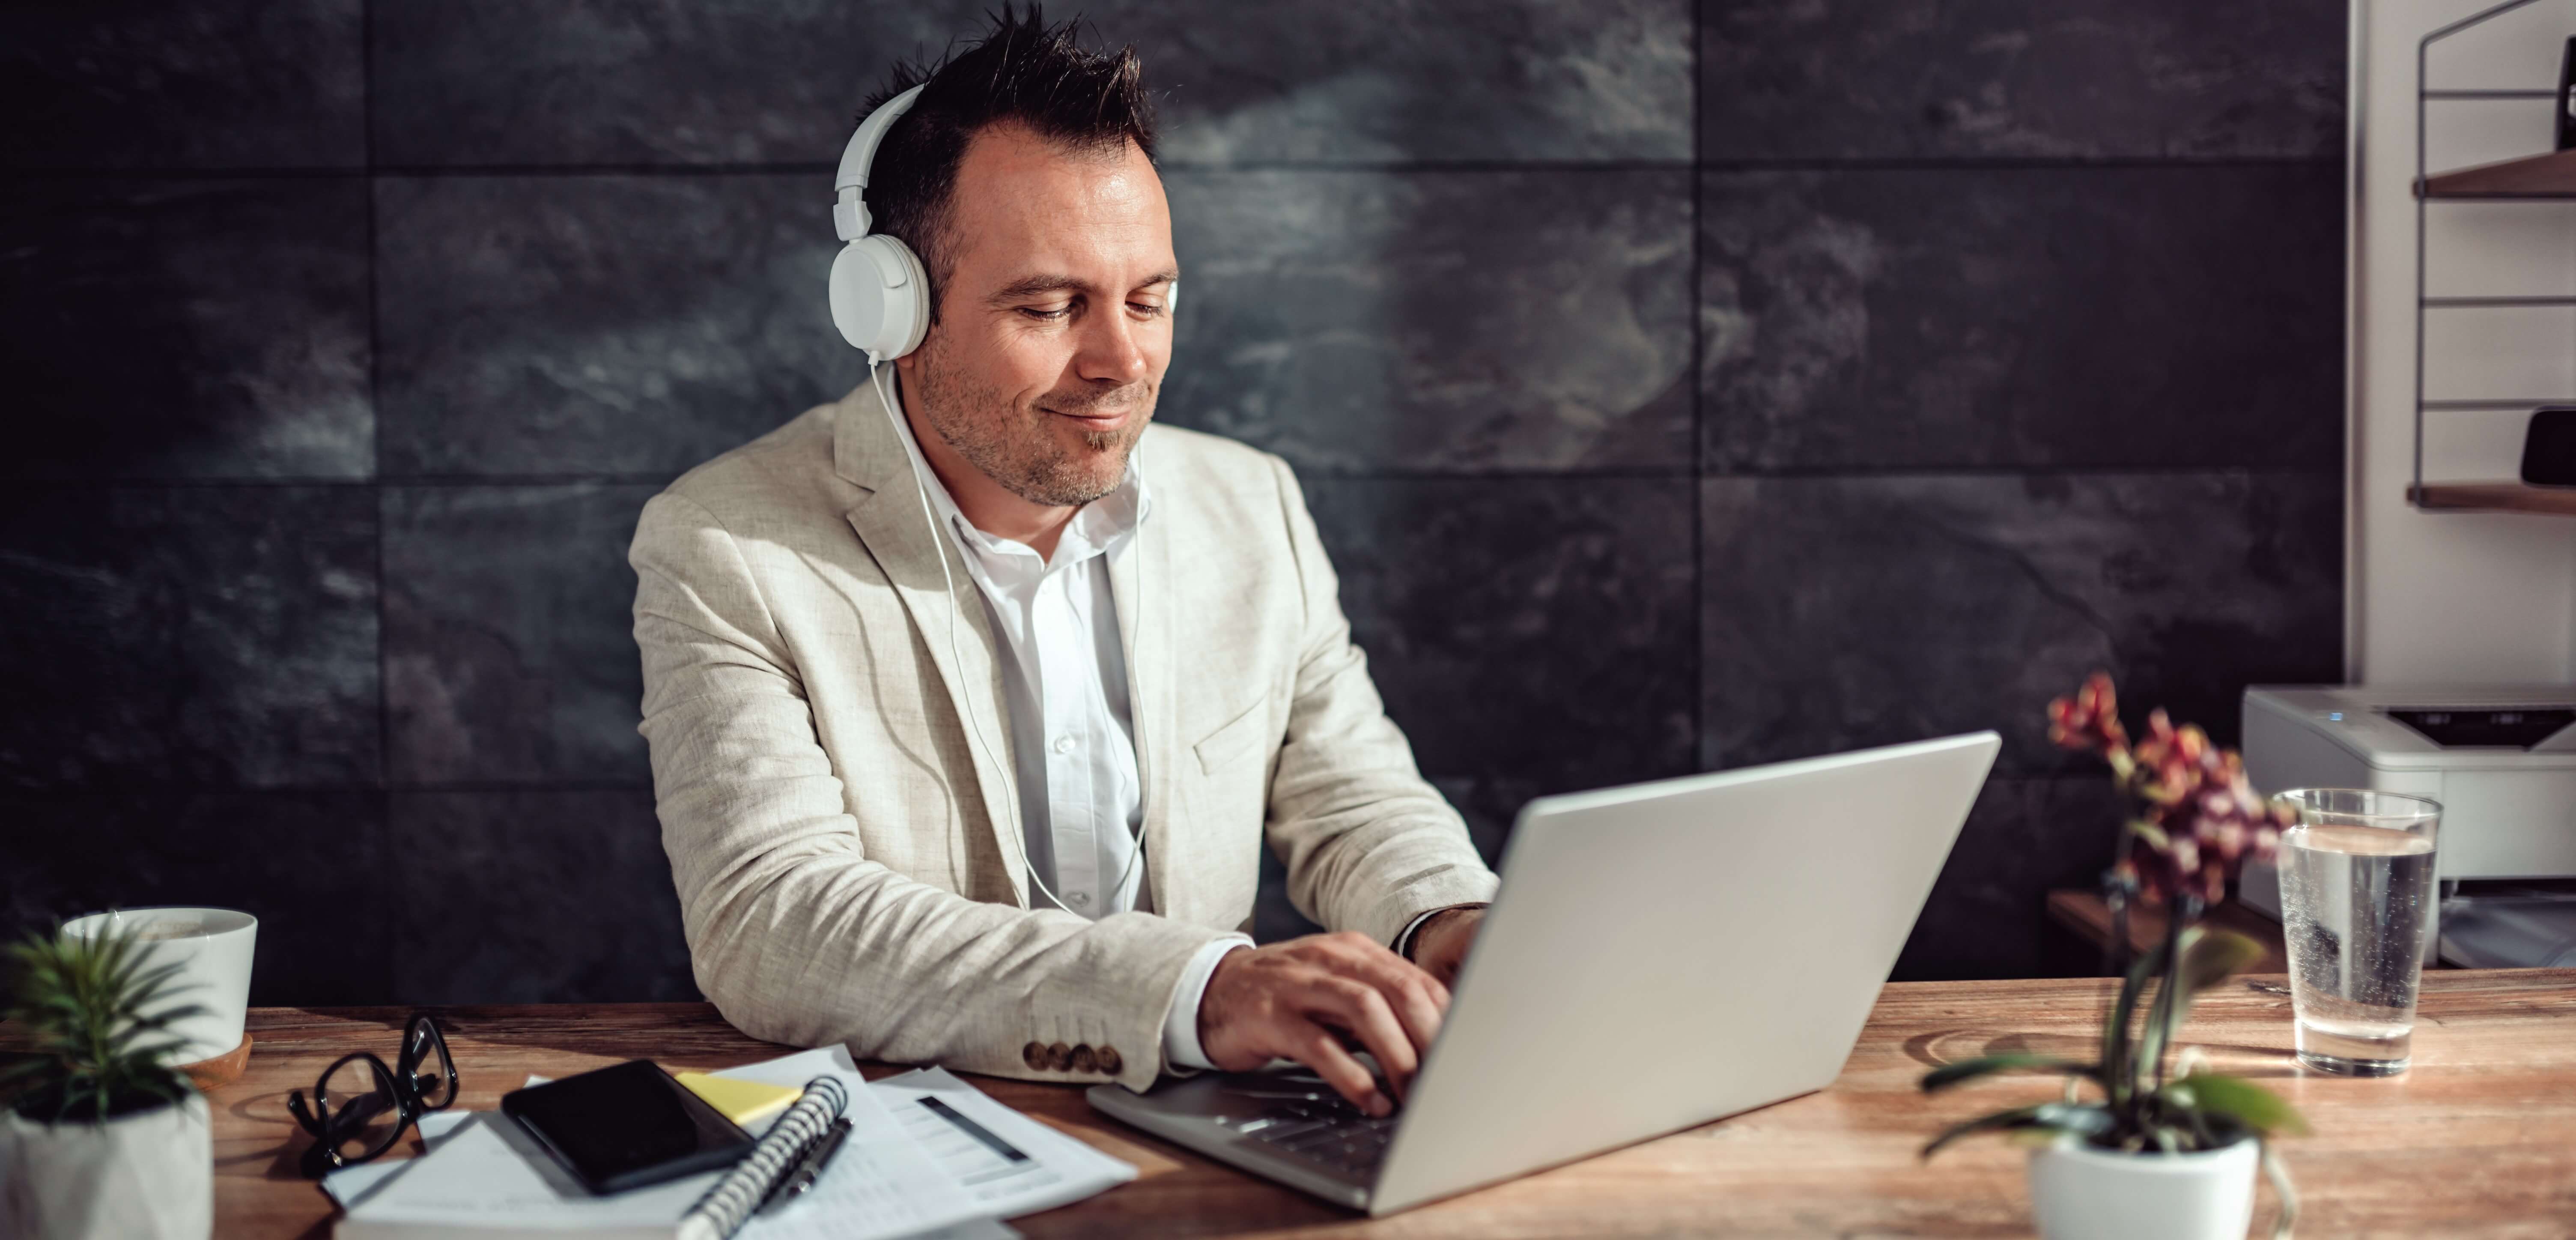 man in front of laptop with headphones working remotely from home